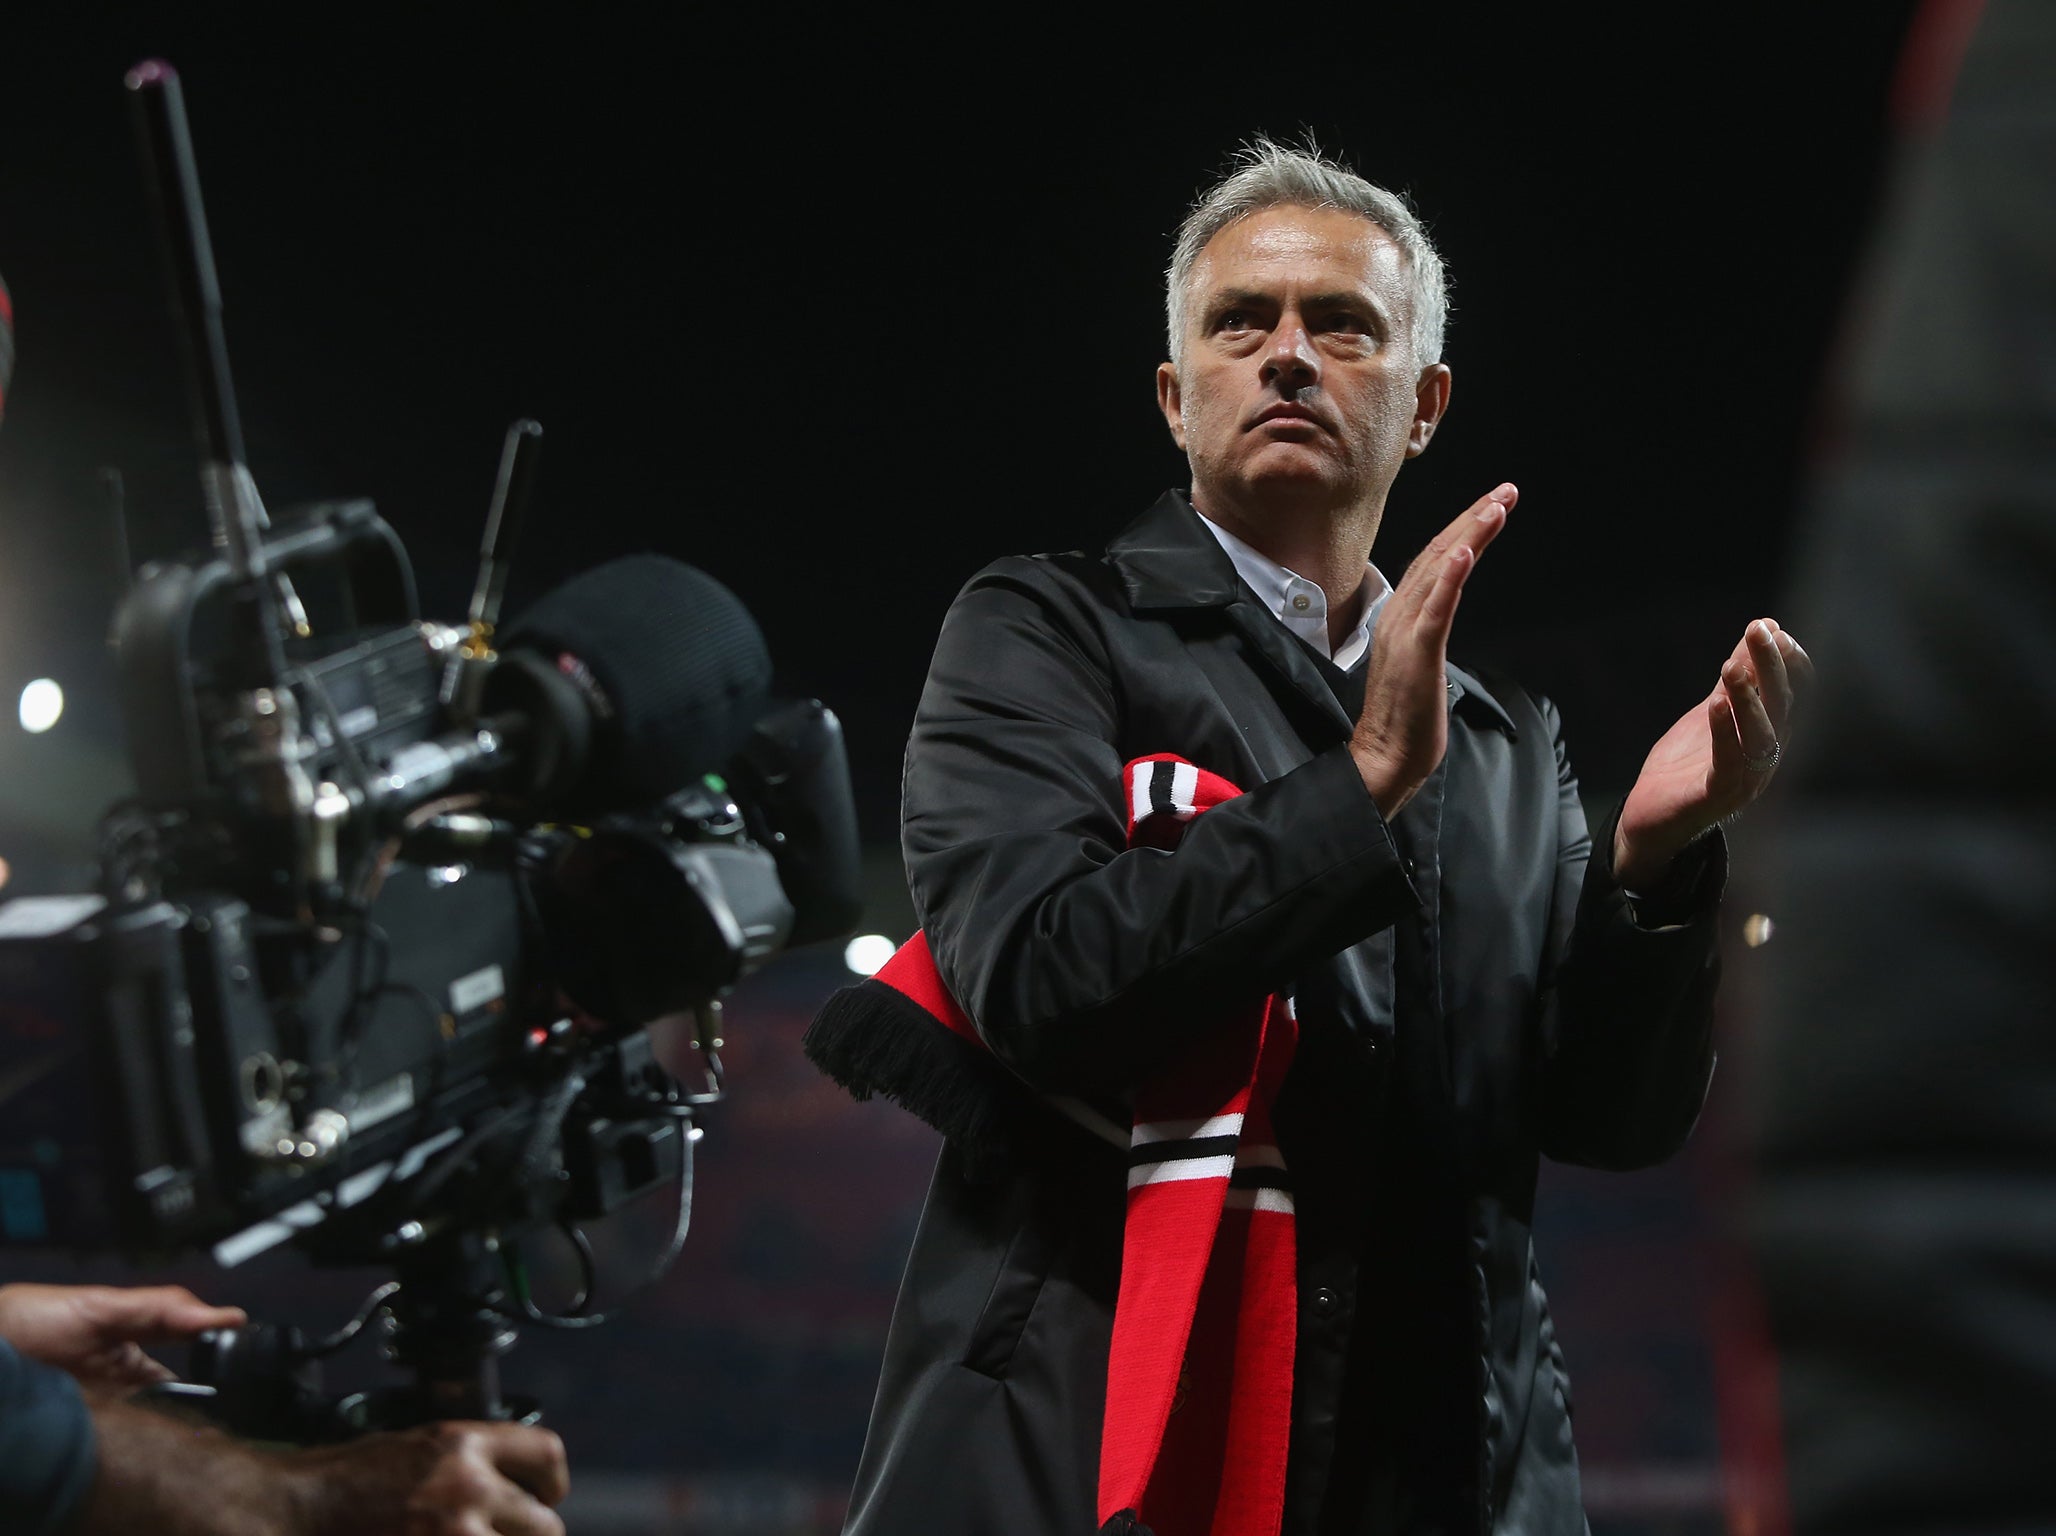 Mourinho stayed to applaud the United fans after the whistle (Man Utd via Getty)